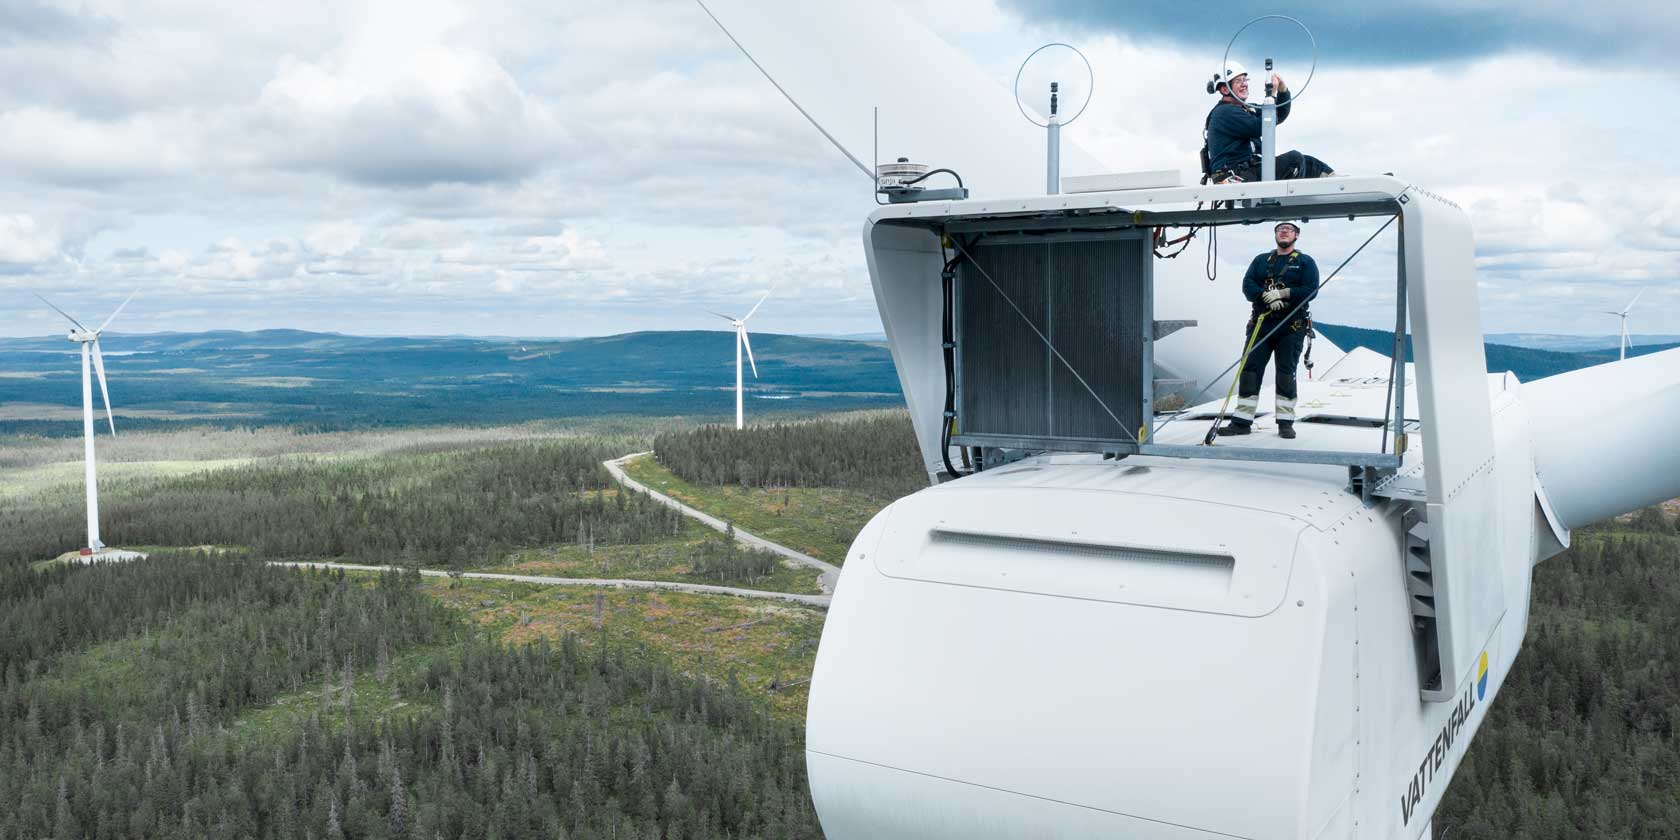 Wind employees at the Stor-Rotliden wind farm in Sweden